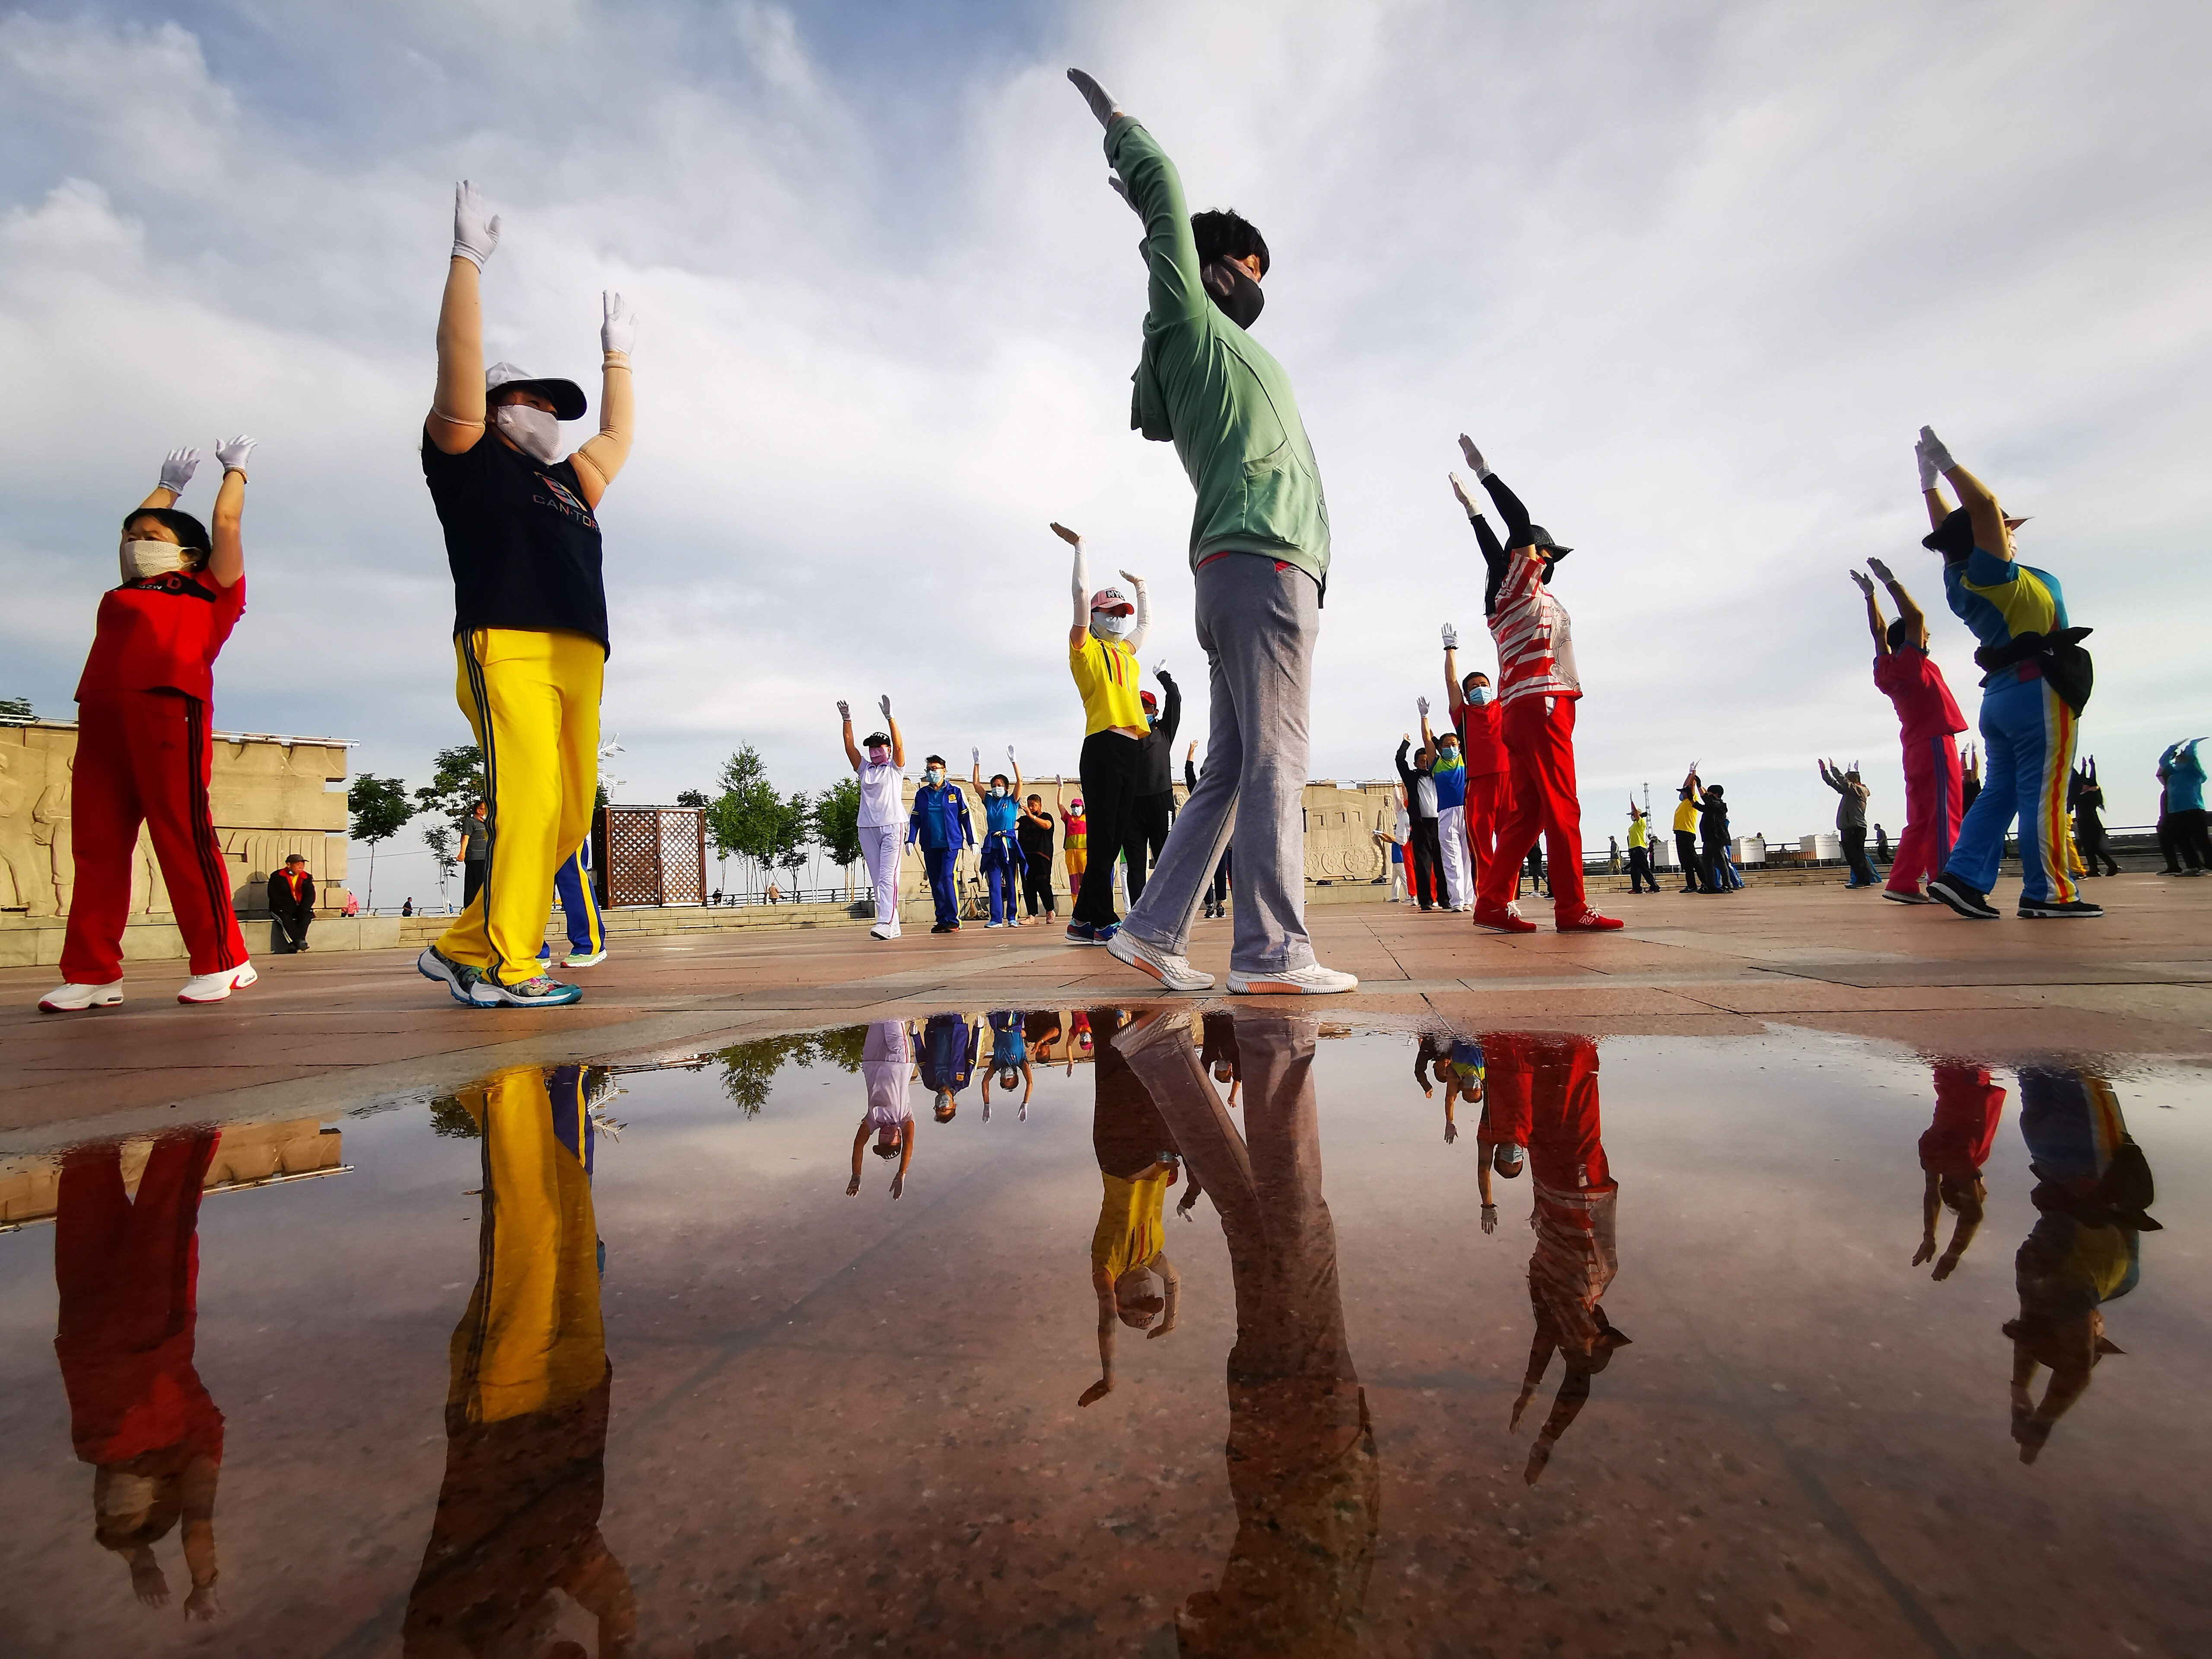 People exercise in Jiamusi, Heilongjiang province, China. Photo: Getty Images